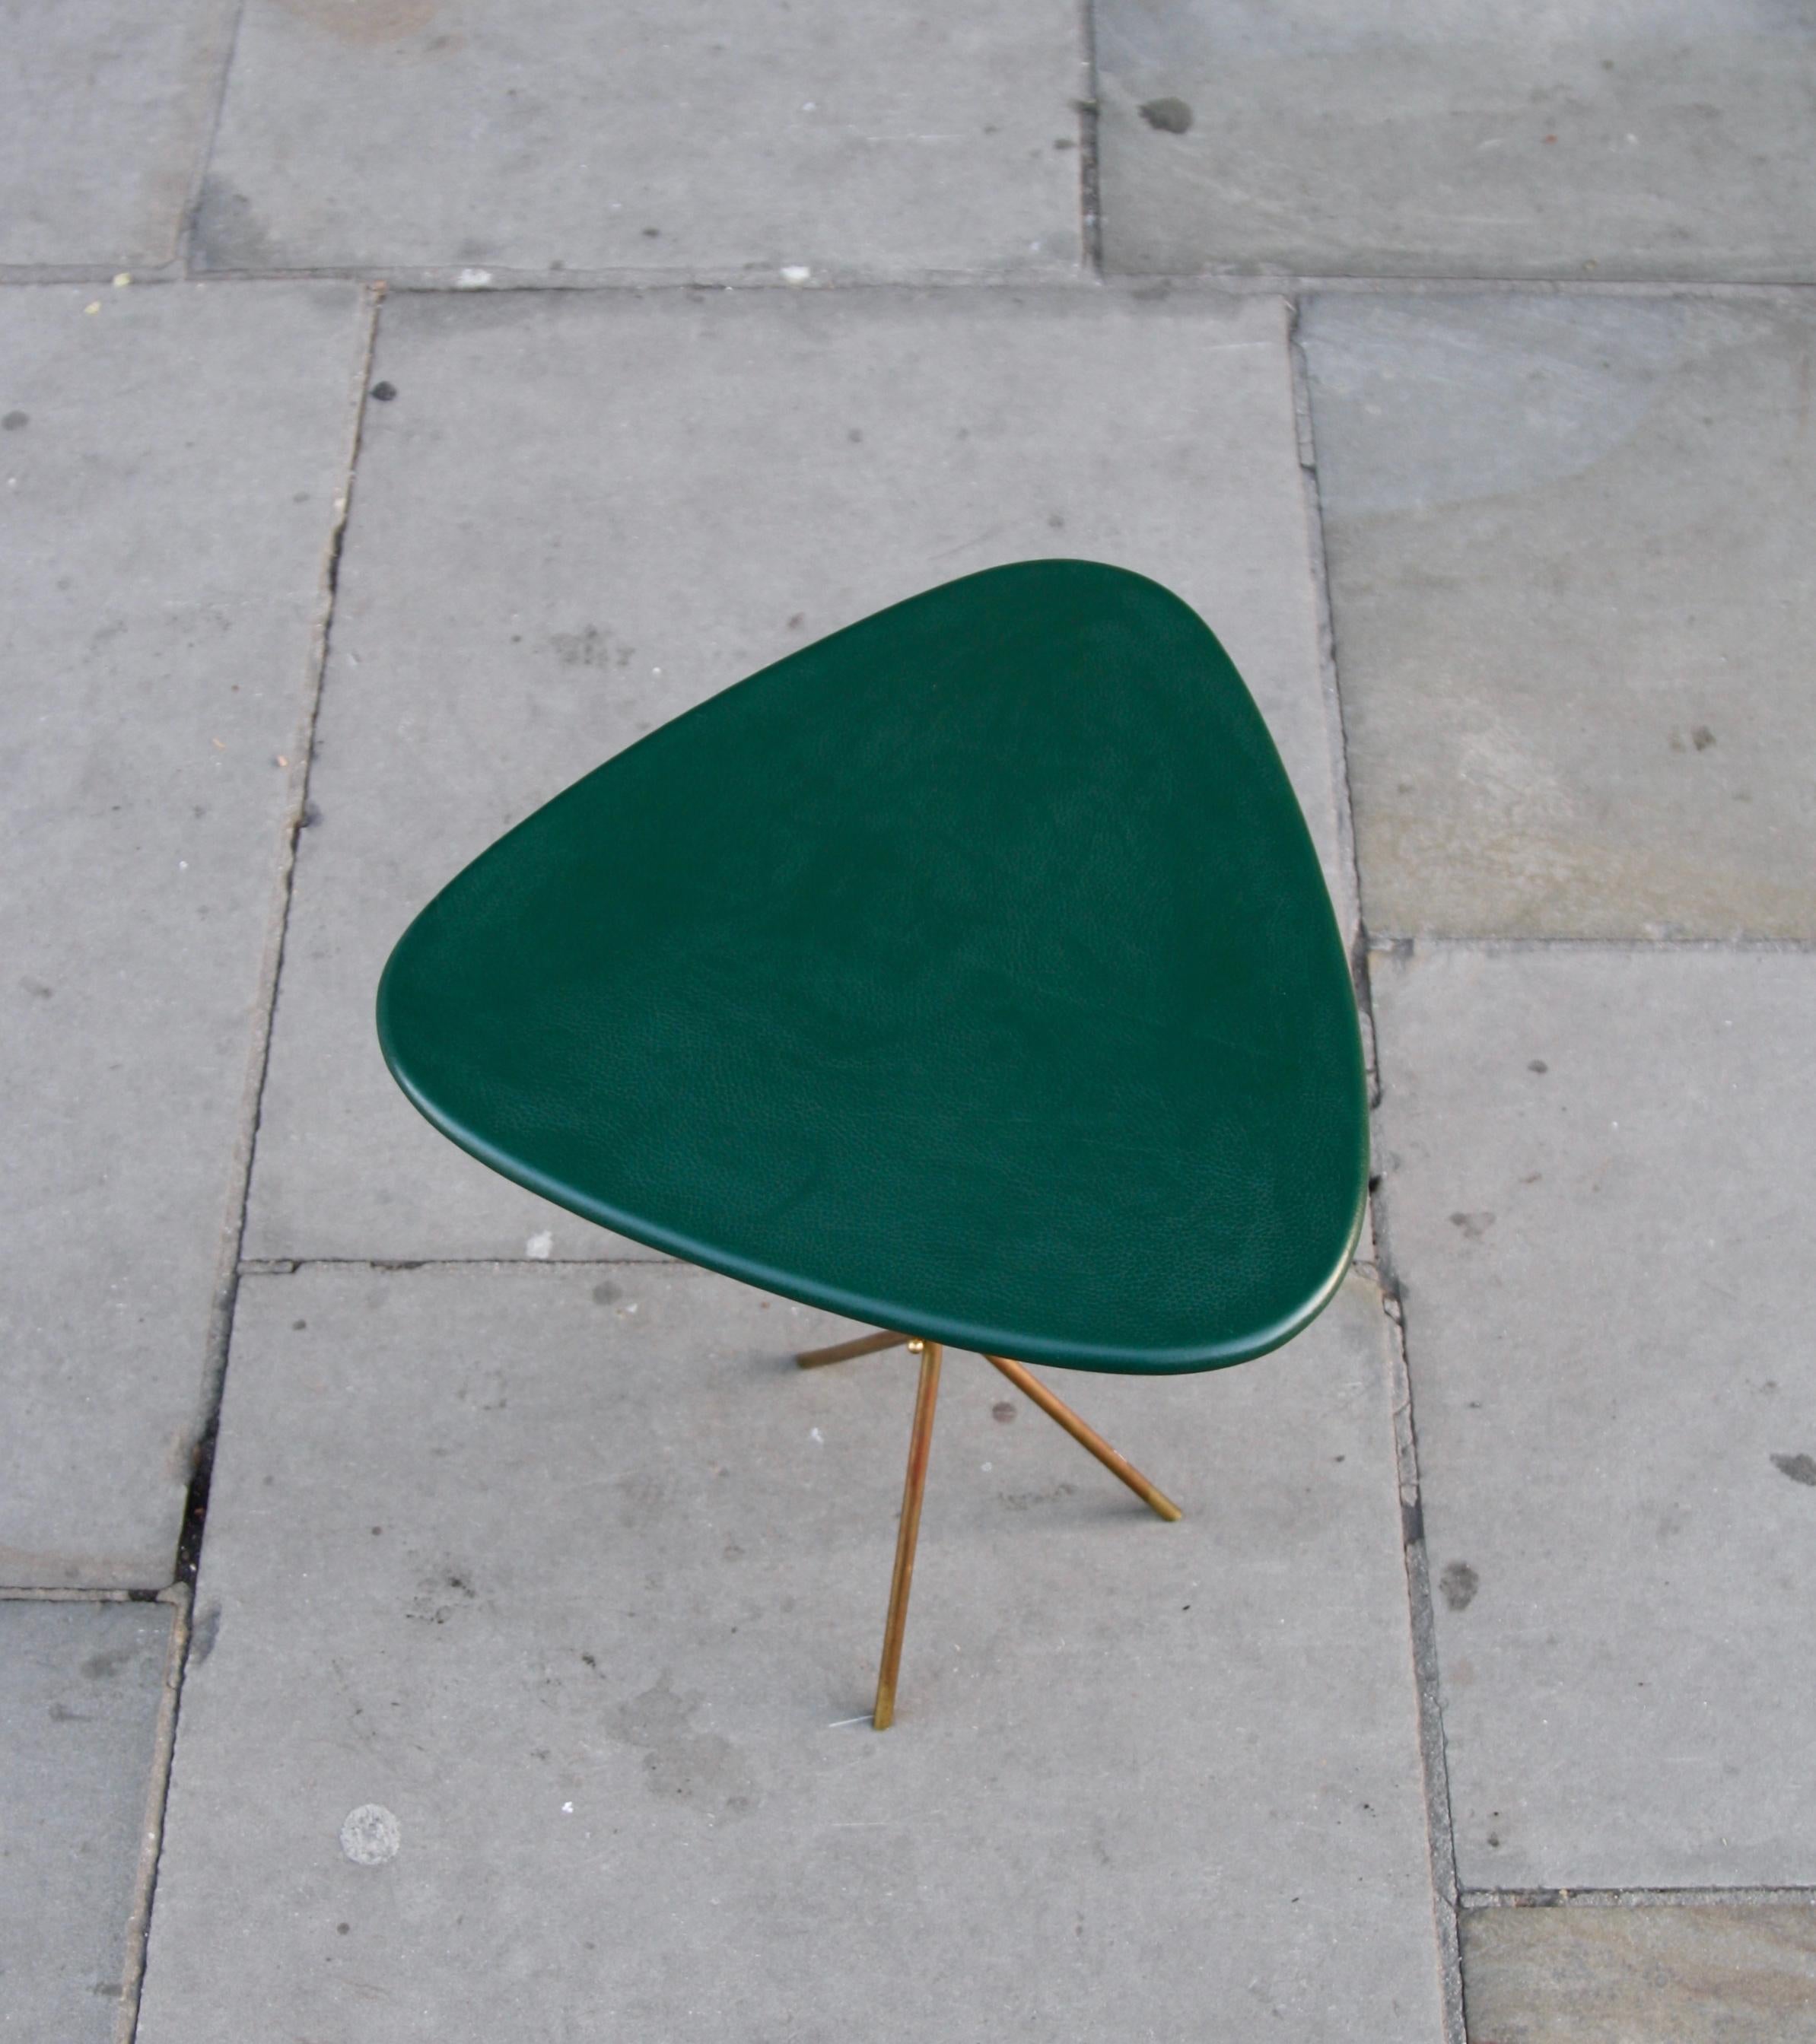 A slender collapsible tripod table designed by Carl Auböck II circa 1955 and made by Auböck IV in the same workshop in Vienna circa 2000.
The biomorphic tabletop, made of carved solid oak, has been newly clad in a rich-leaf-green colored